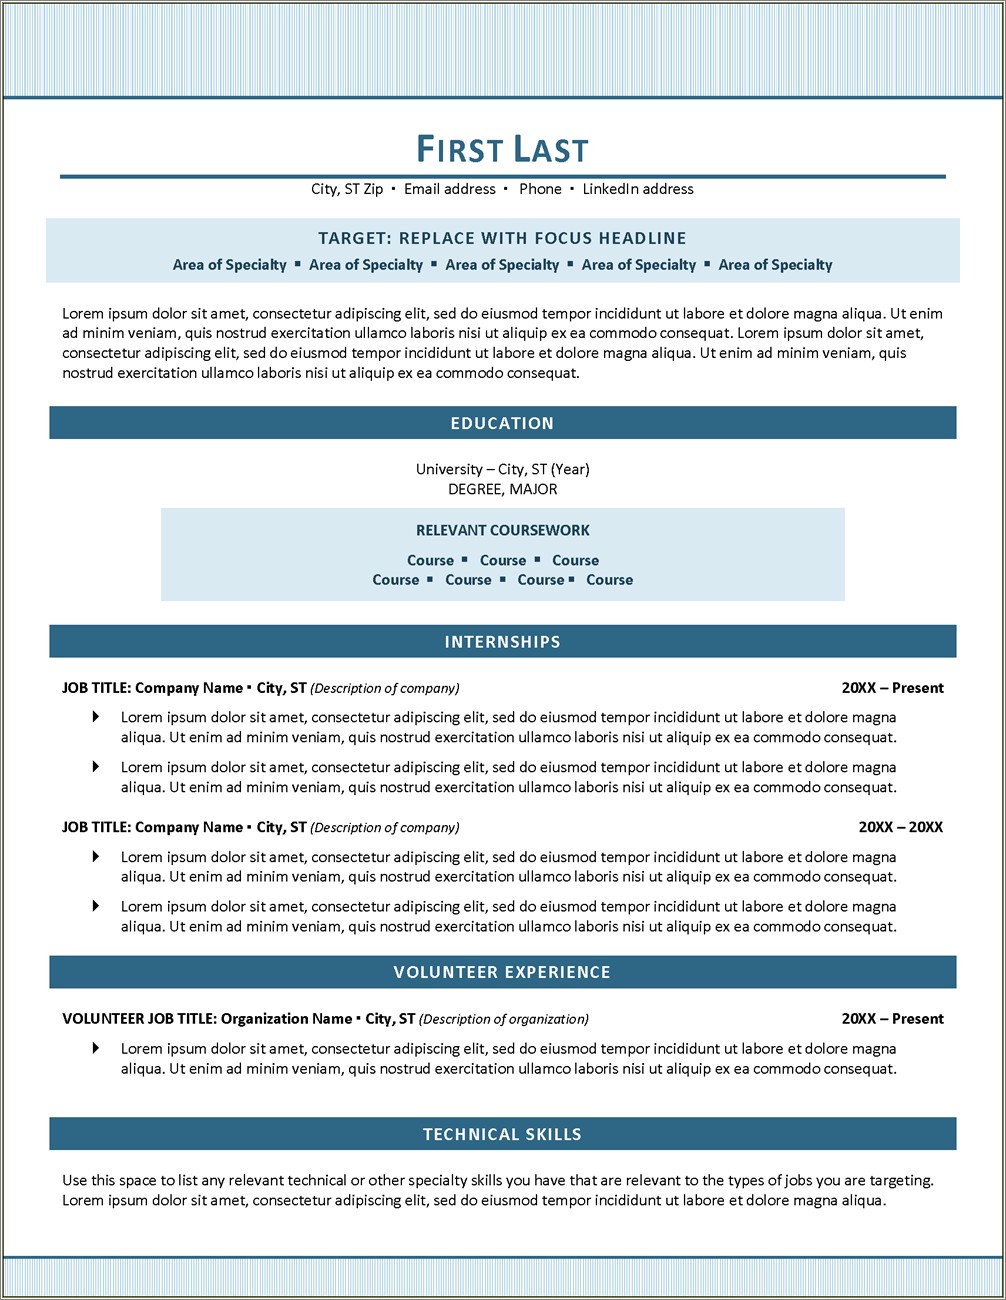 Email Resume Template For College Students